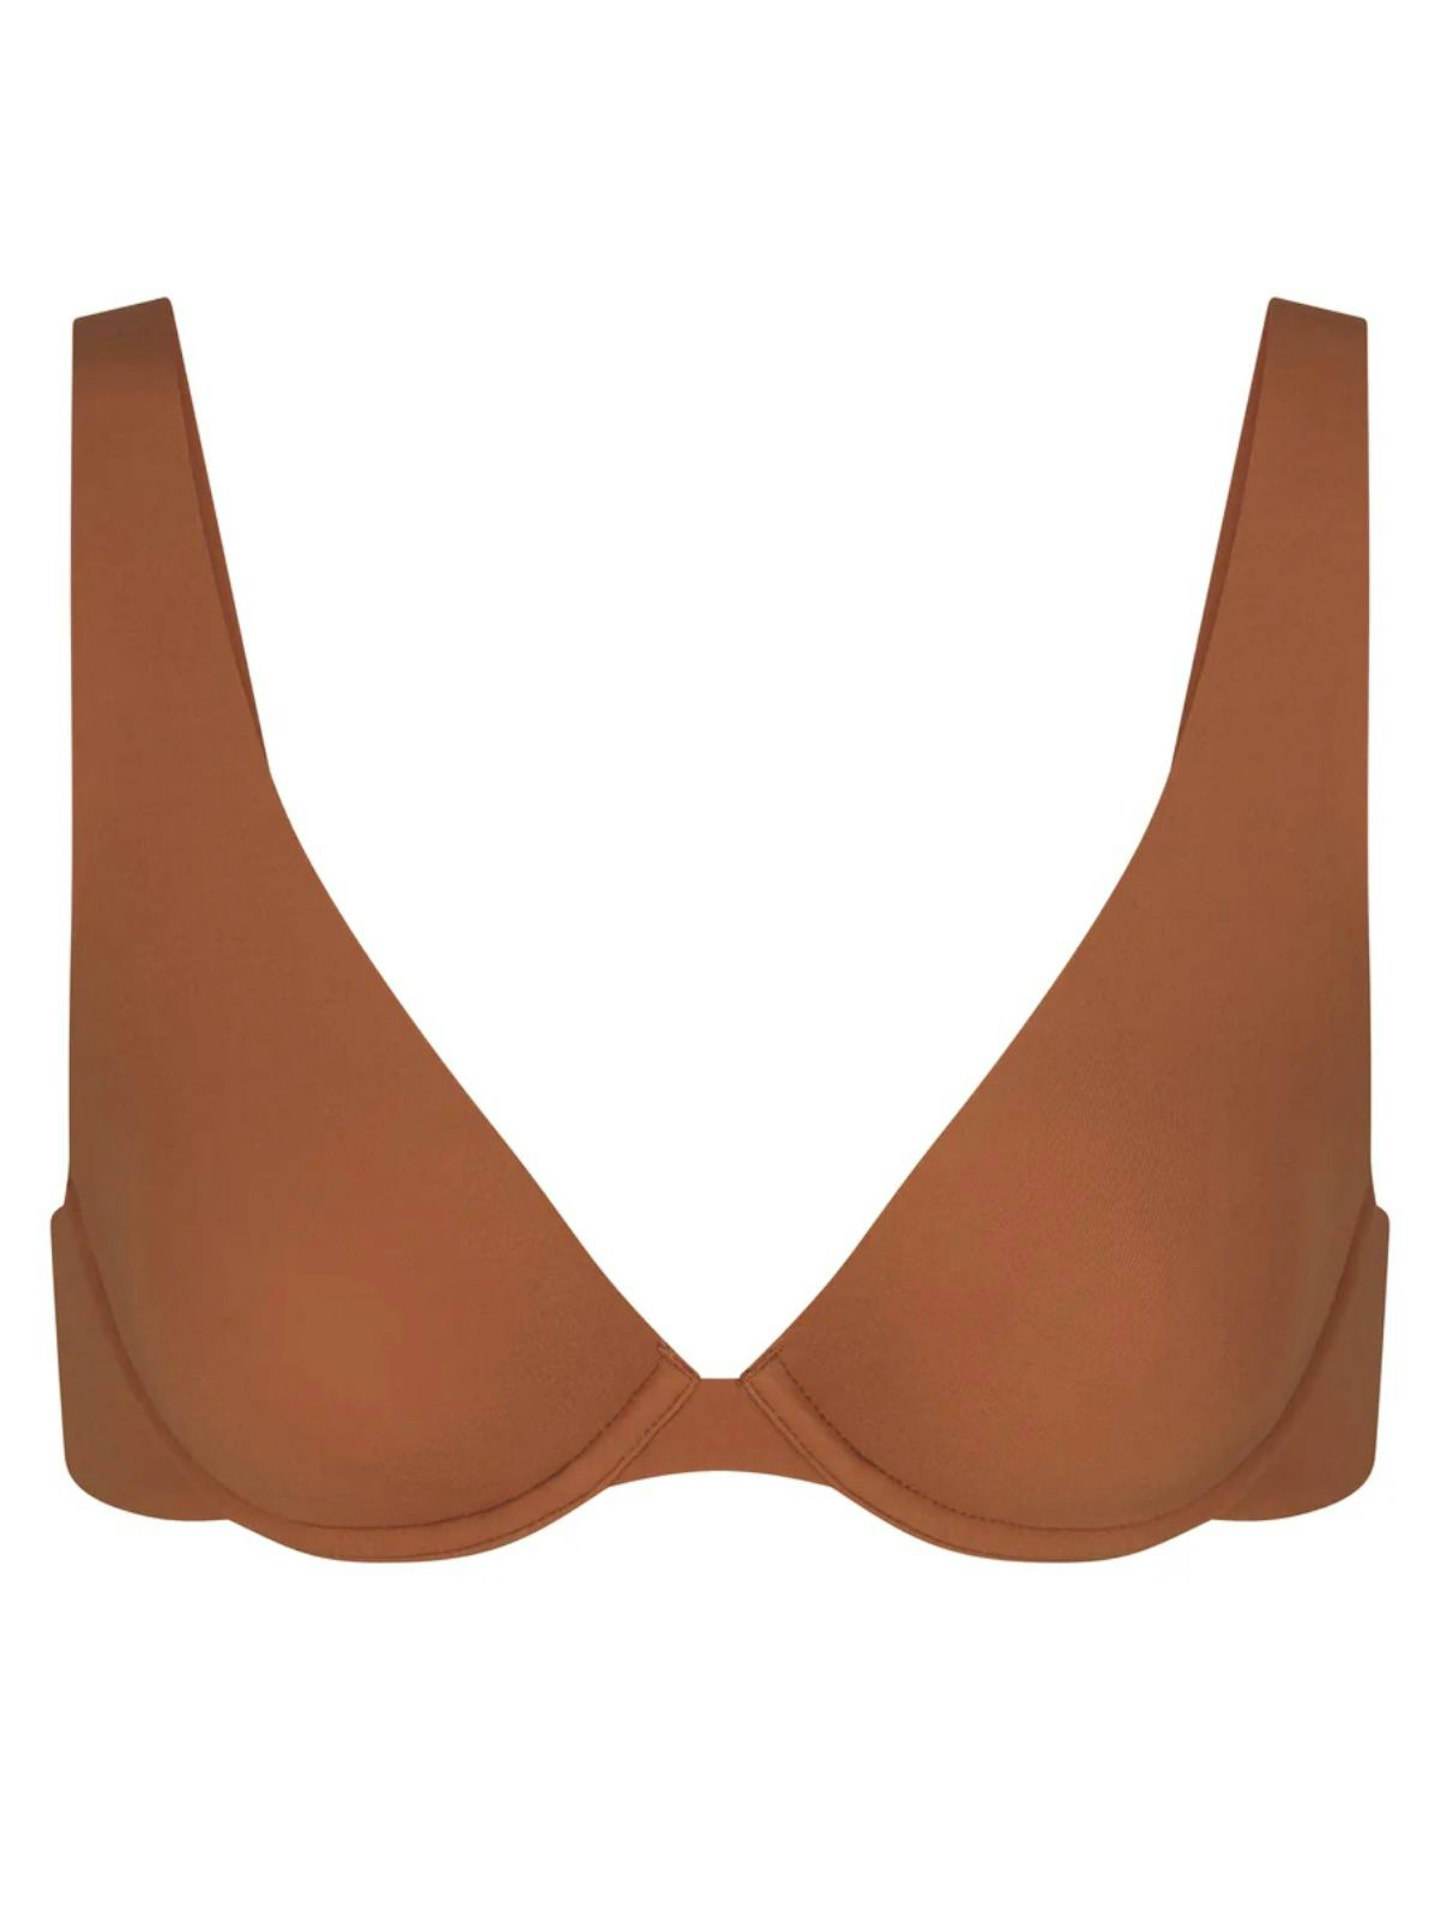 Fits Everybody Unlined Apex Plunge Bra